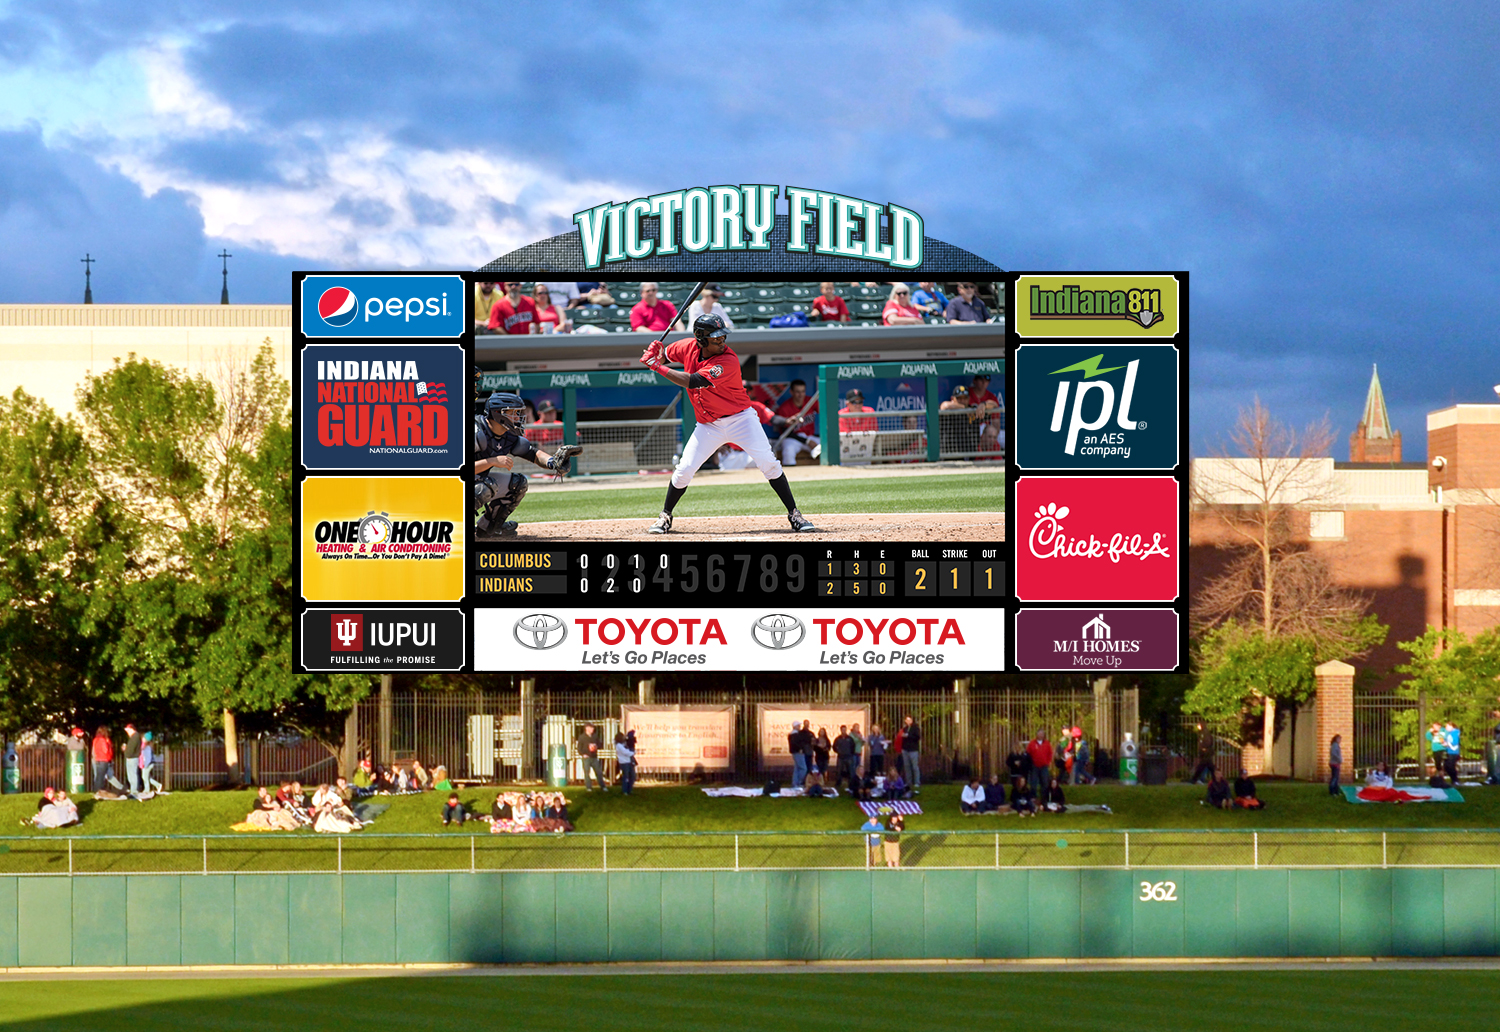 The highlight of the new enhancements will be an HD video board that will be three times the size of the current board. (Rendering courtesy of Indianapolis Indians)